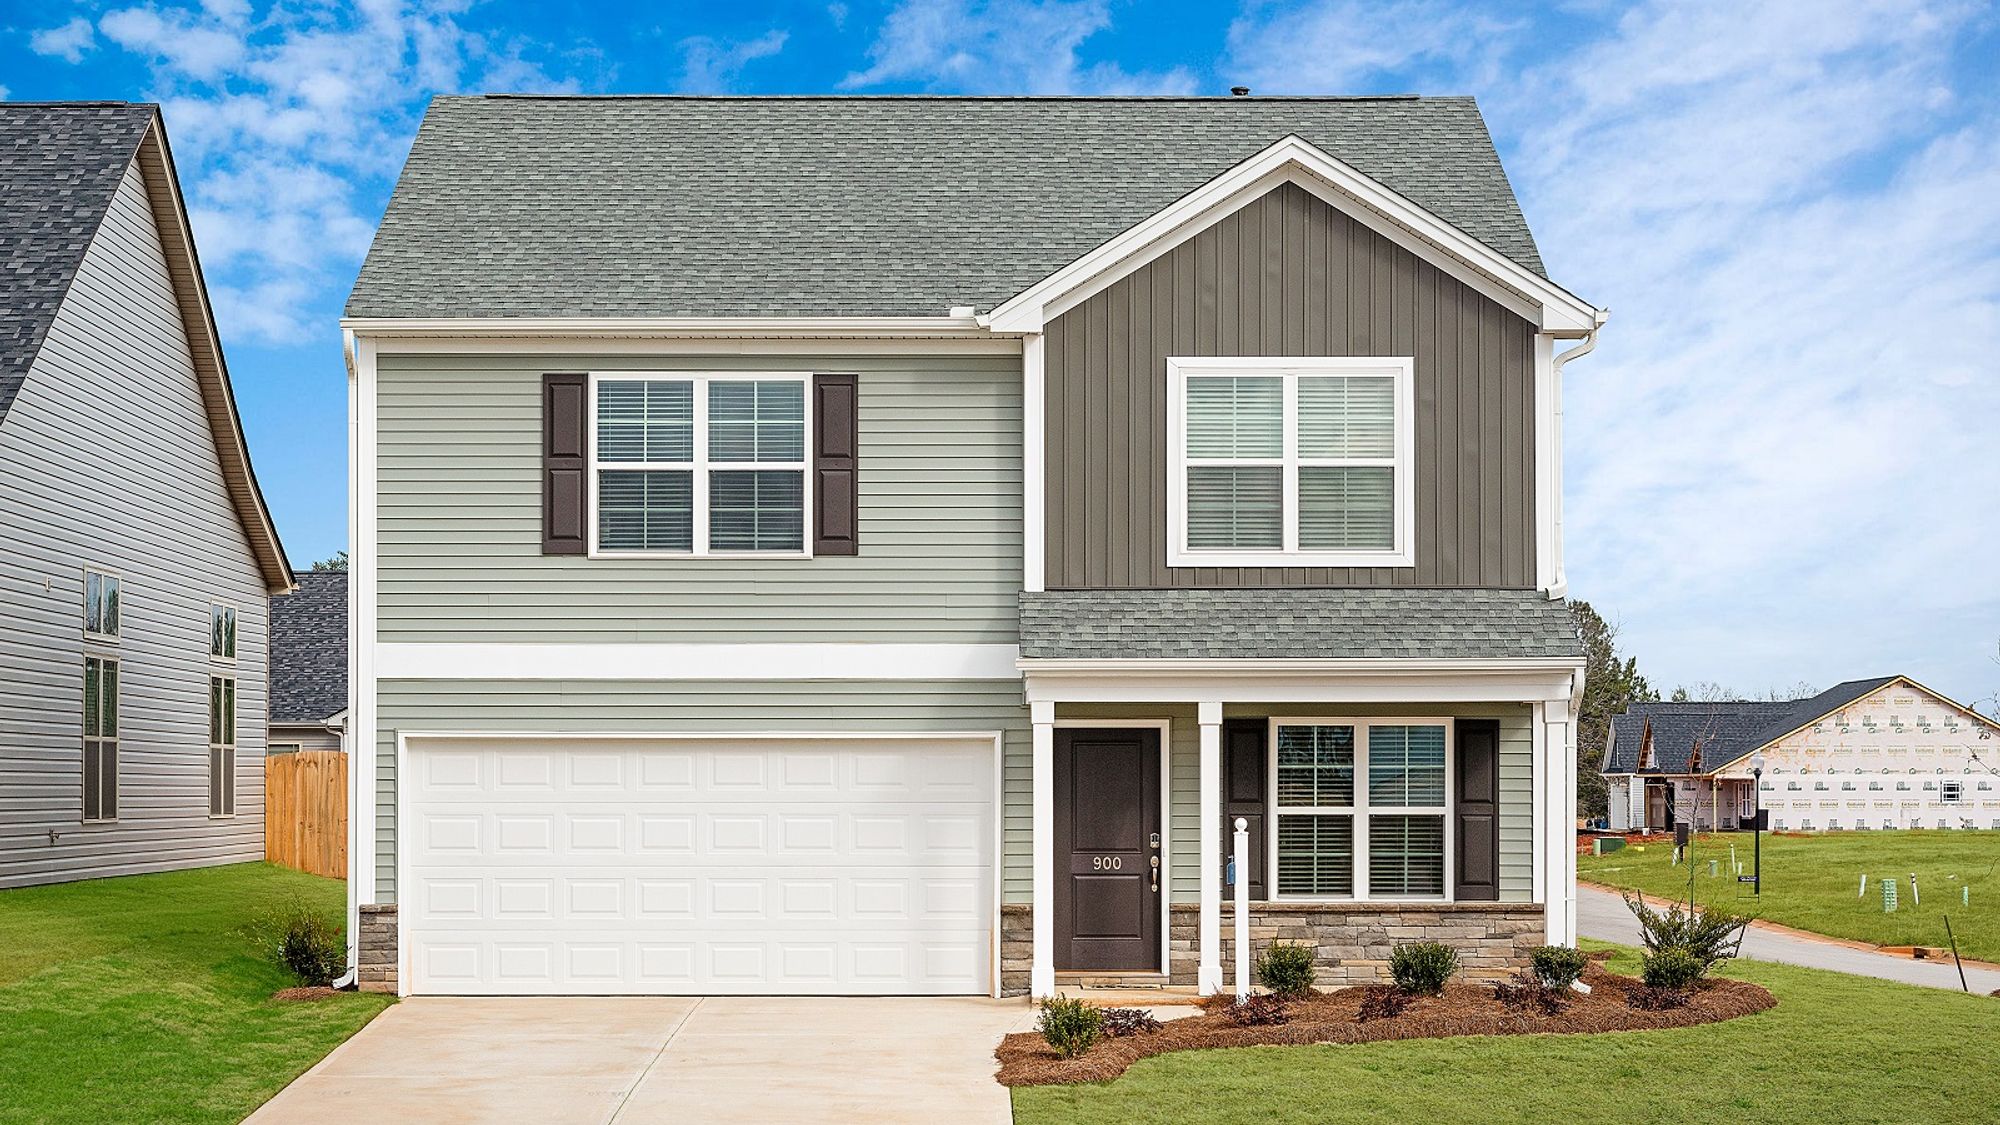 New home for sale in Winston-Salem NC featuring Mungo's Guilford Plan